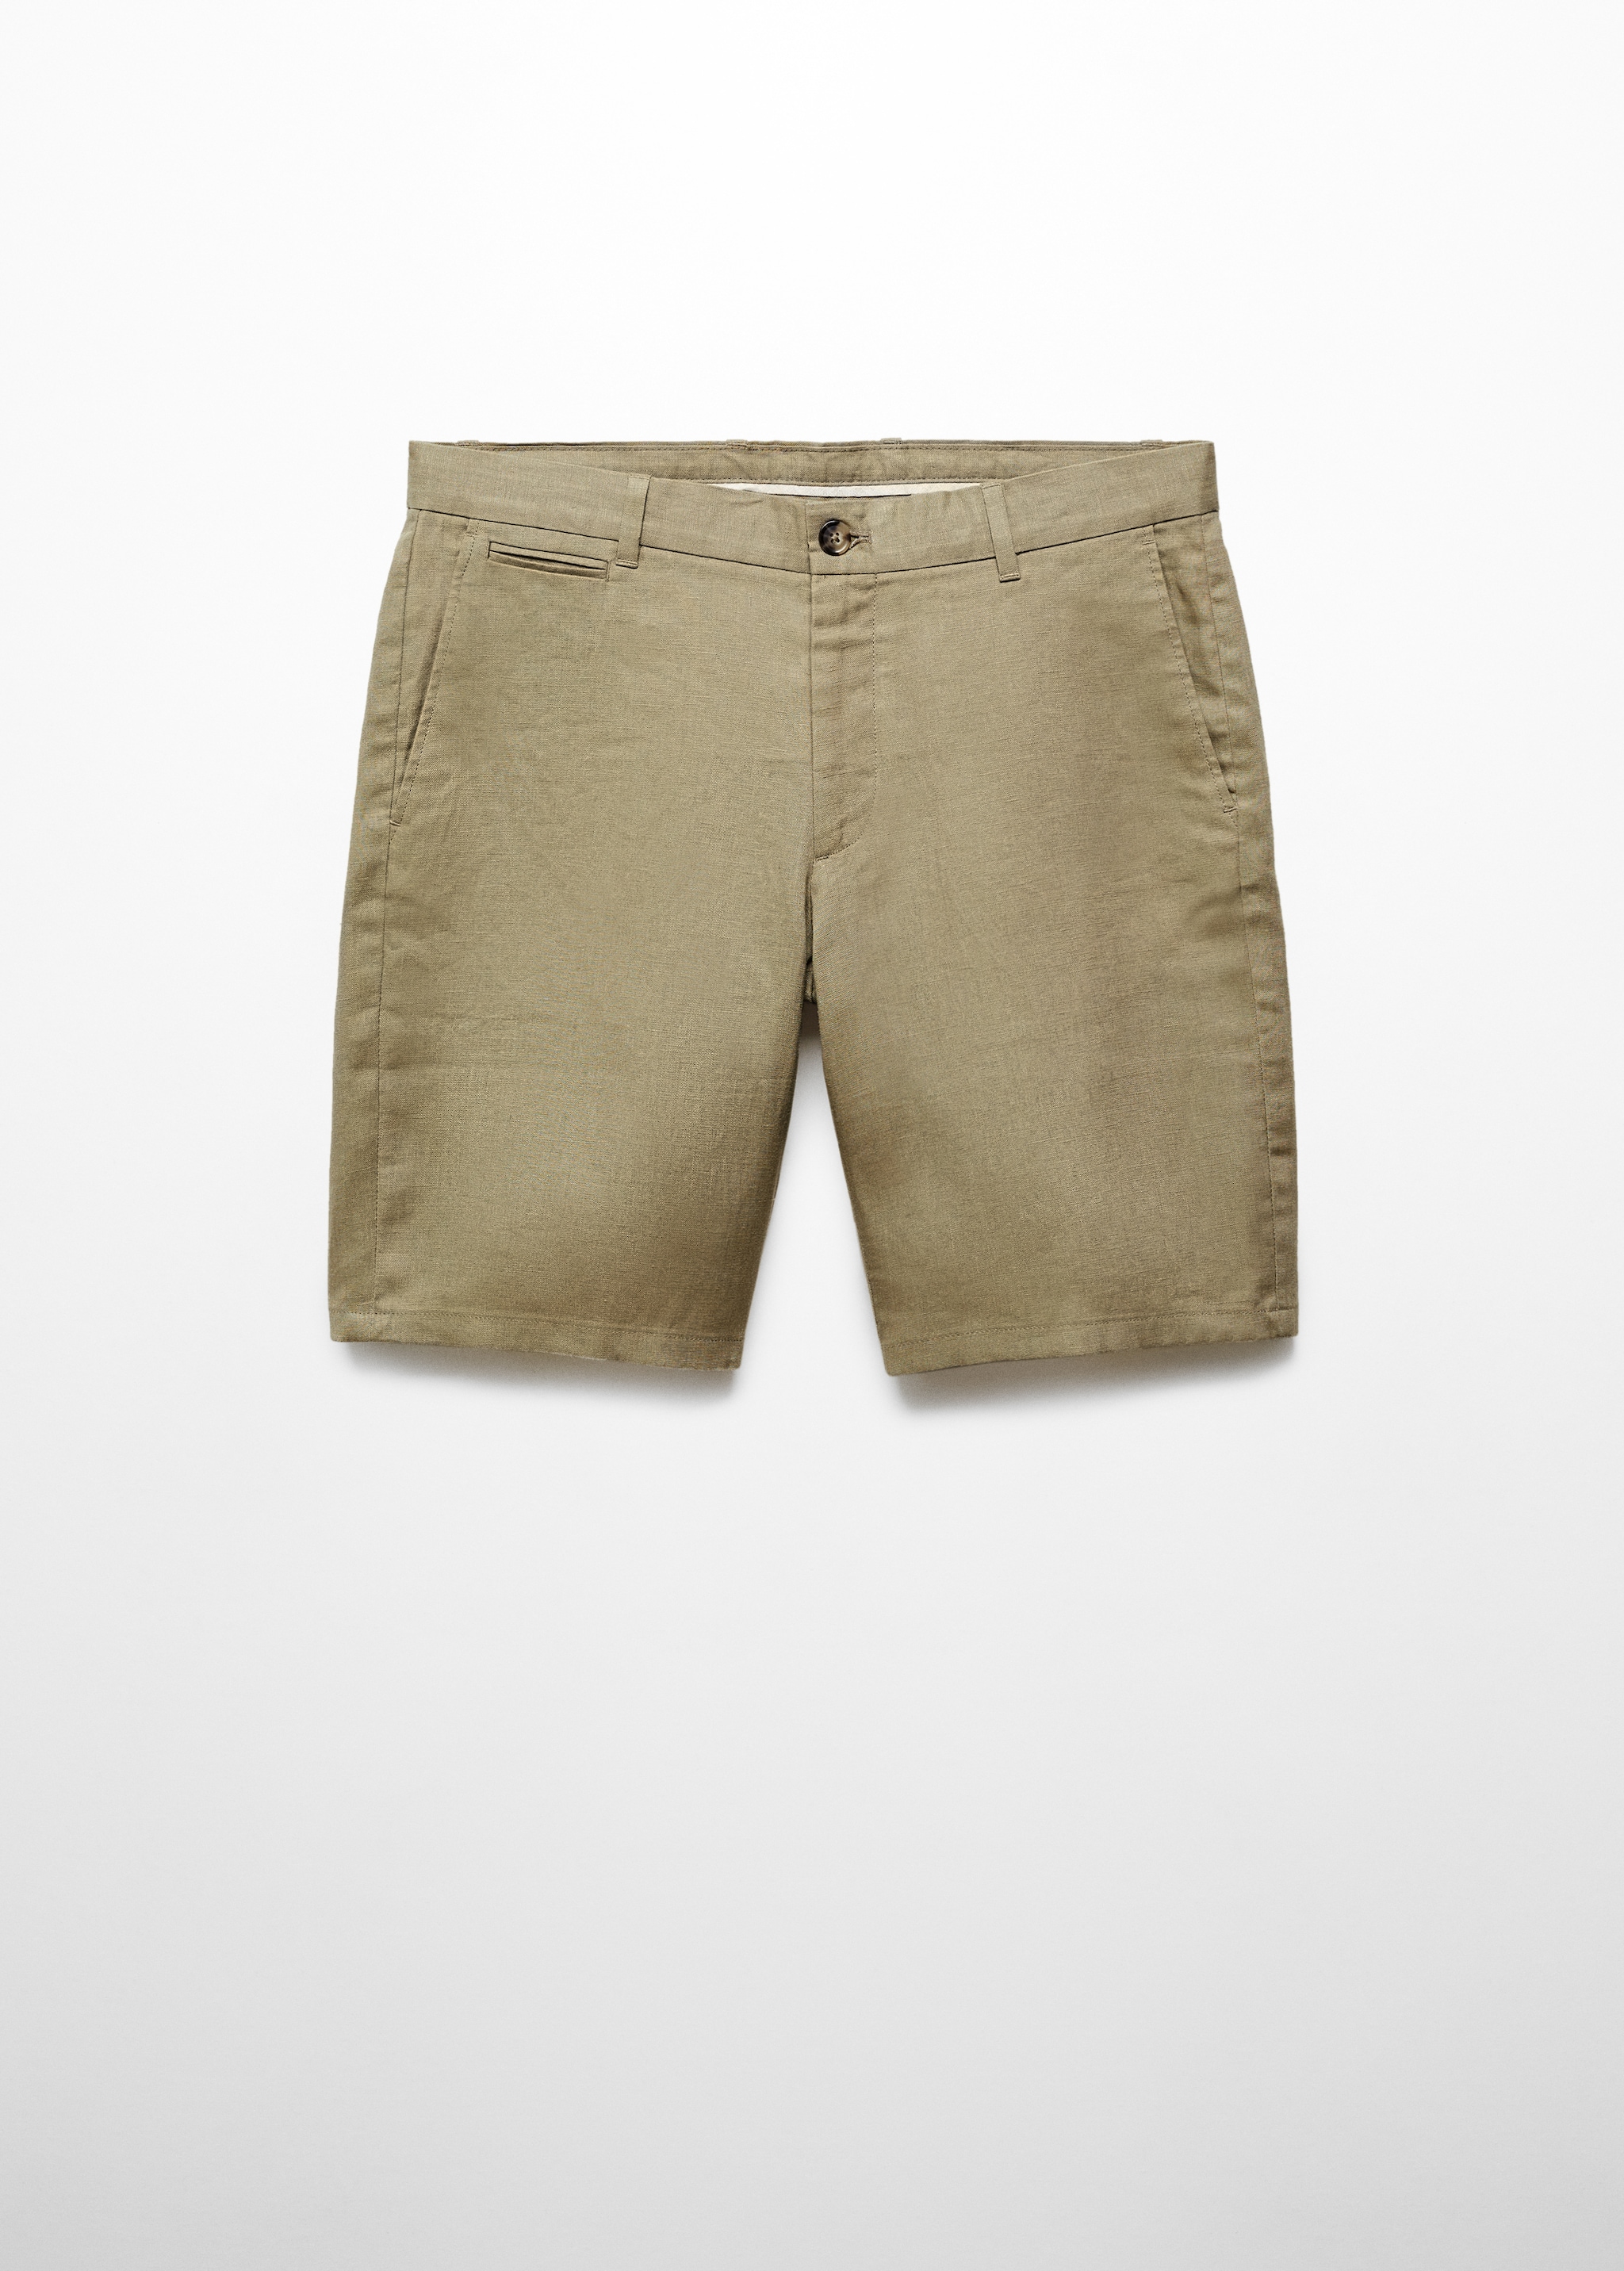 Slim fit 100% linen Bermuda shorts - Article without model